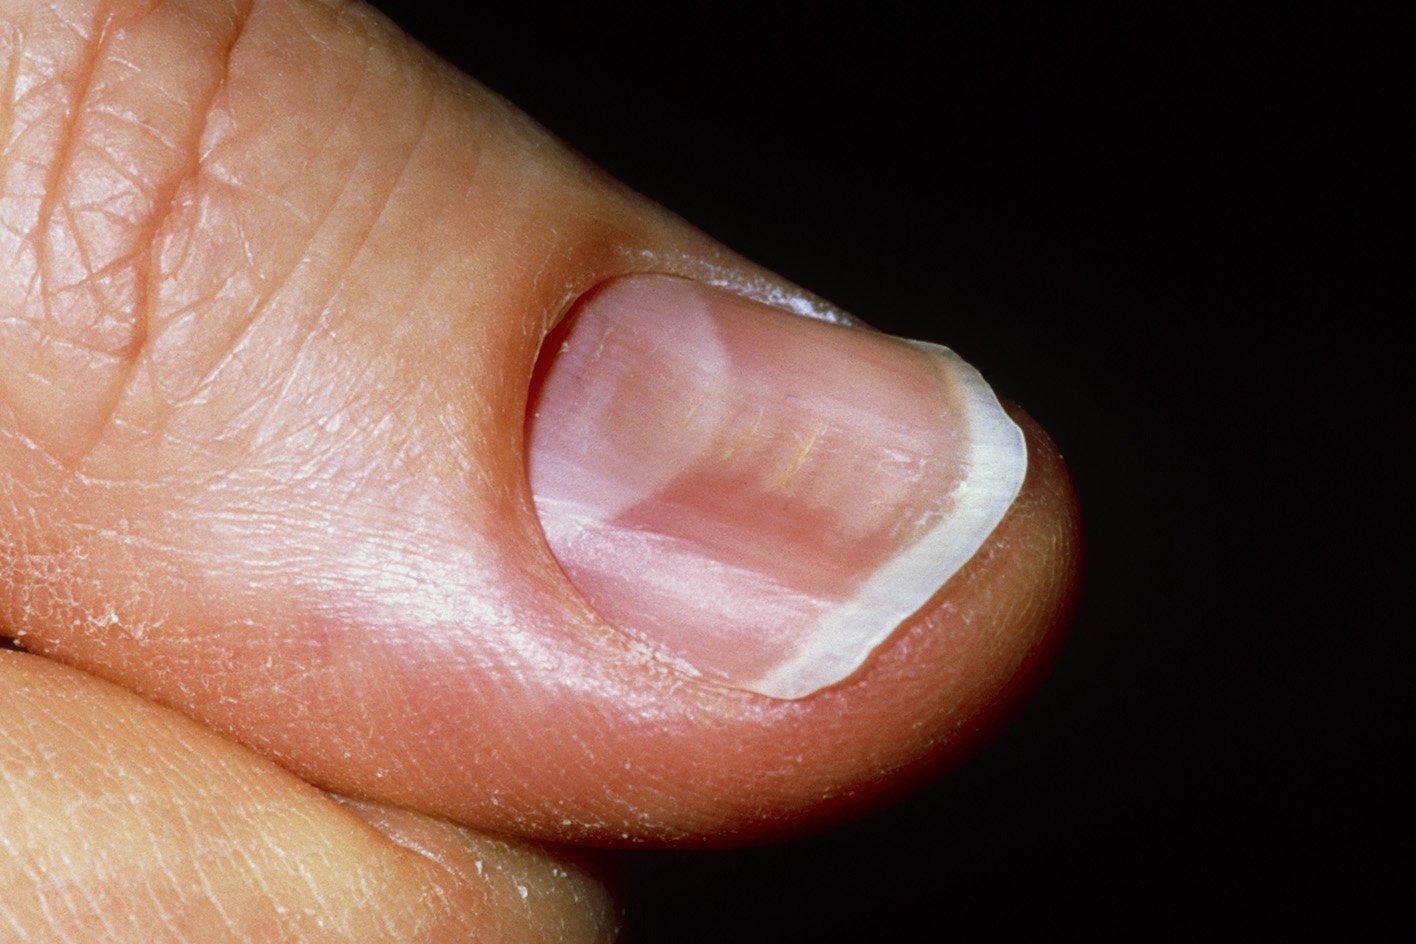 4. Nail Bed Color and Iron Deficiency Anemia - wide 7